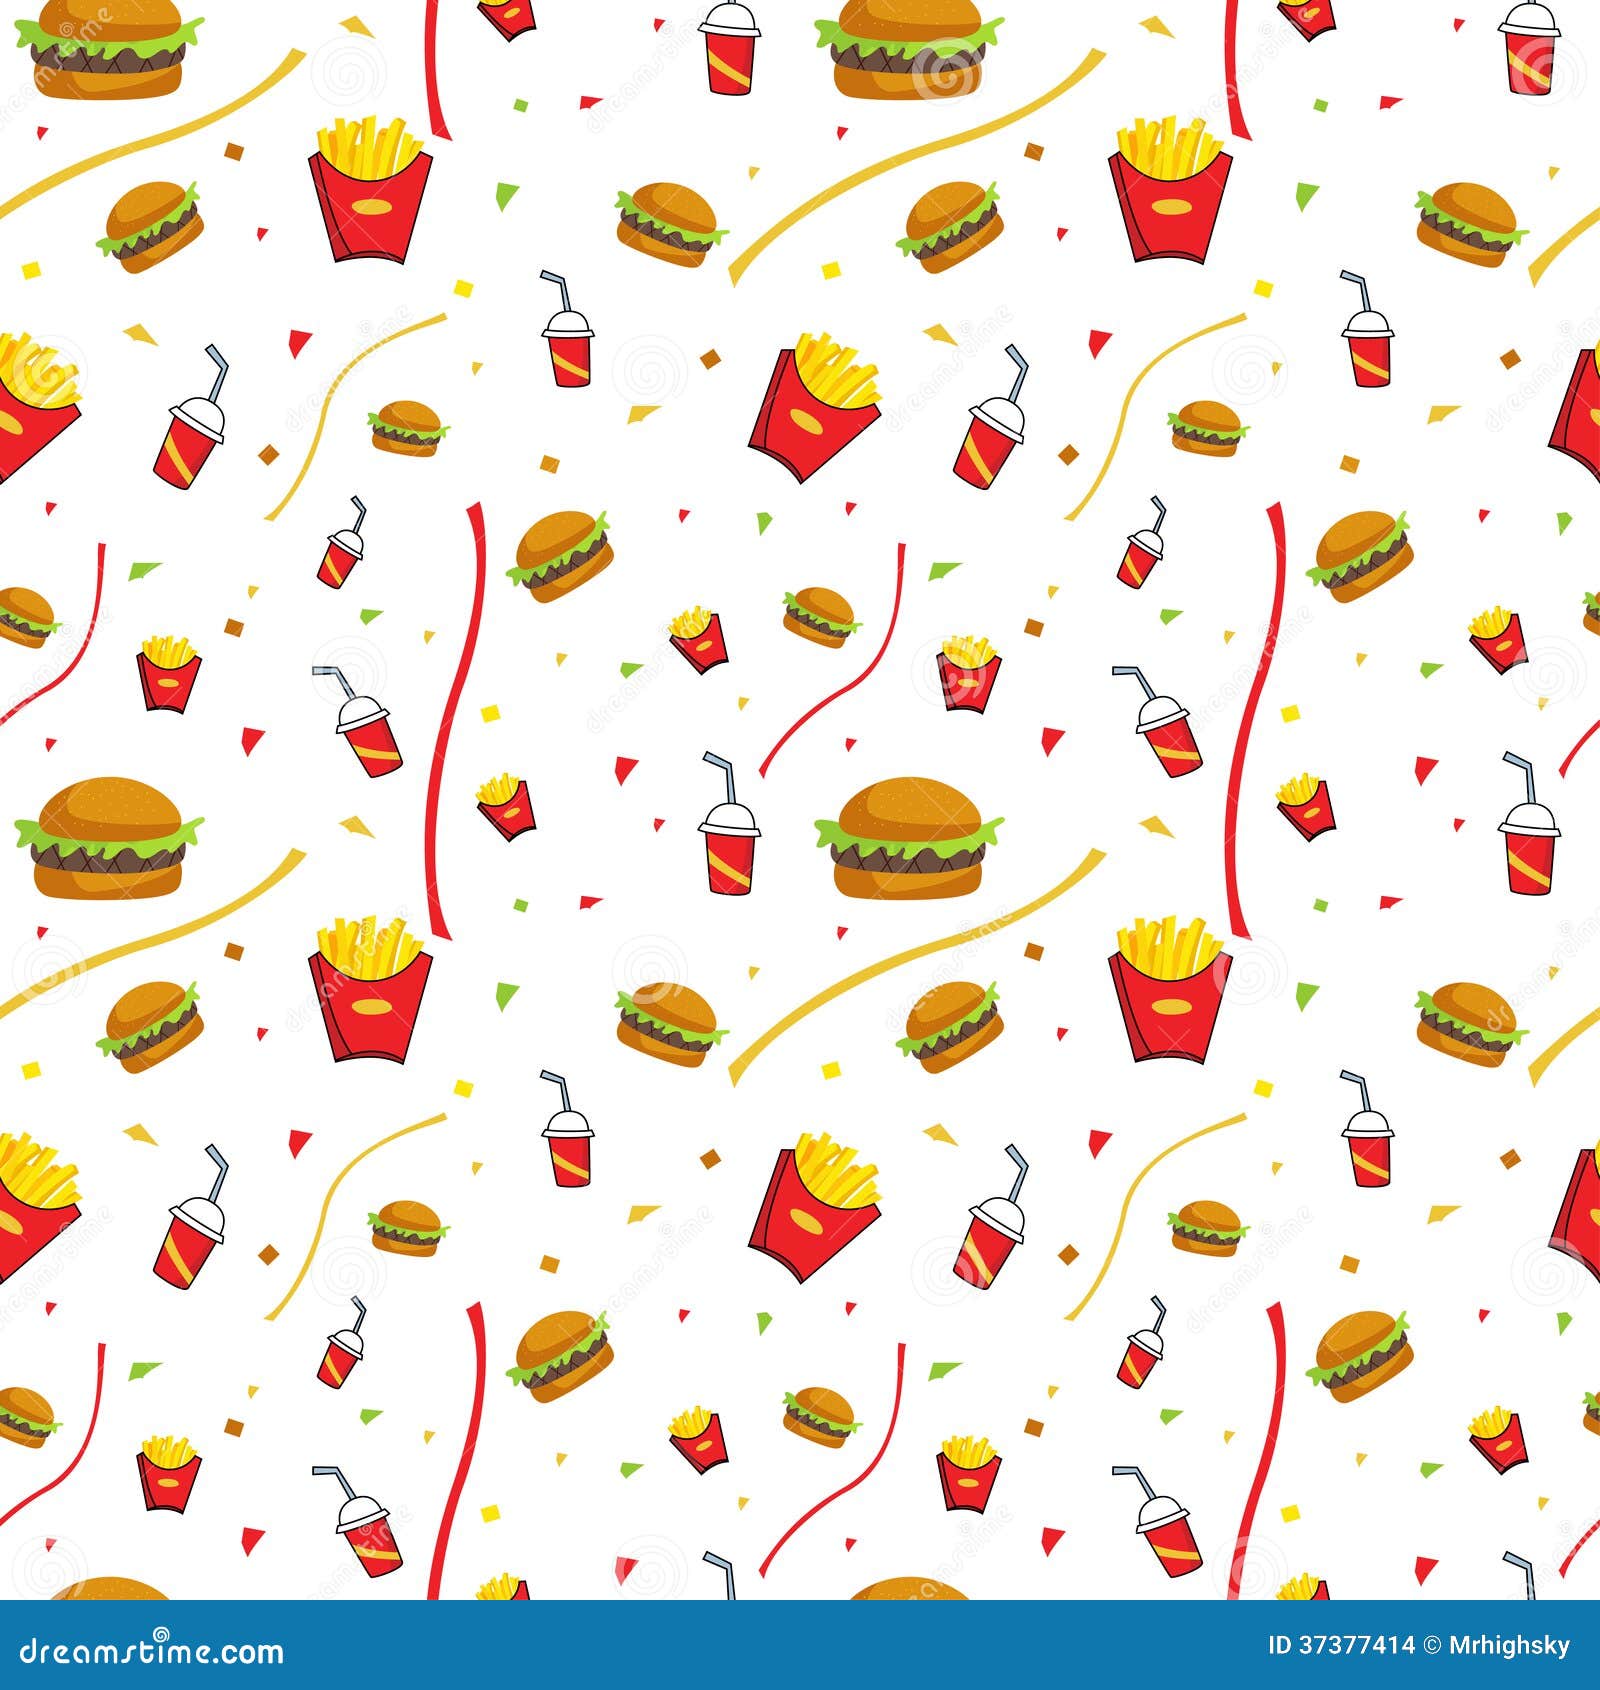 pizza wallpapers tumblr Pattern 37377414 Seamless Fast  Food  Images Stock Image: